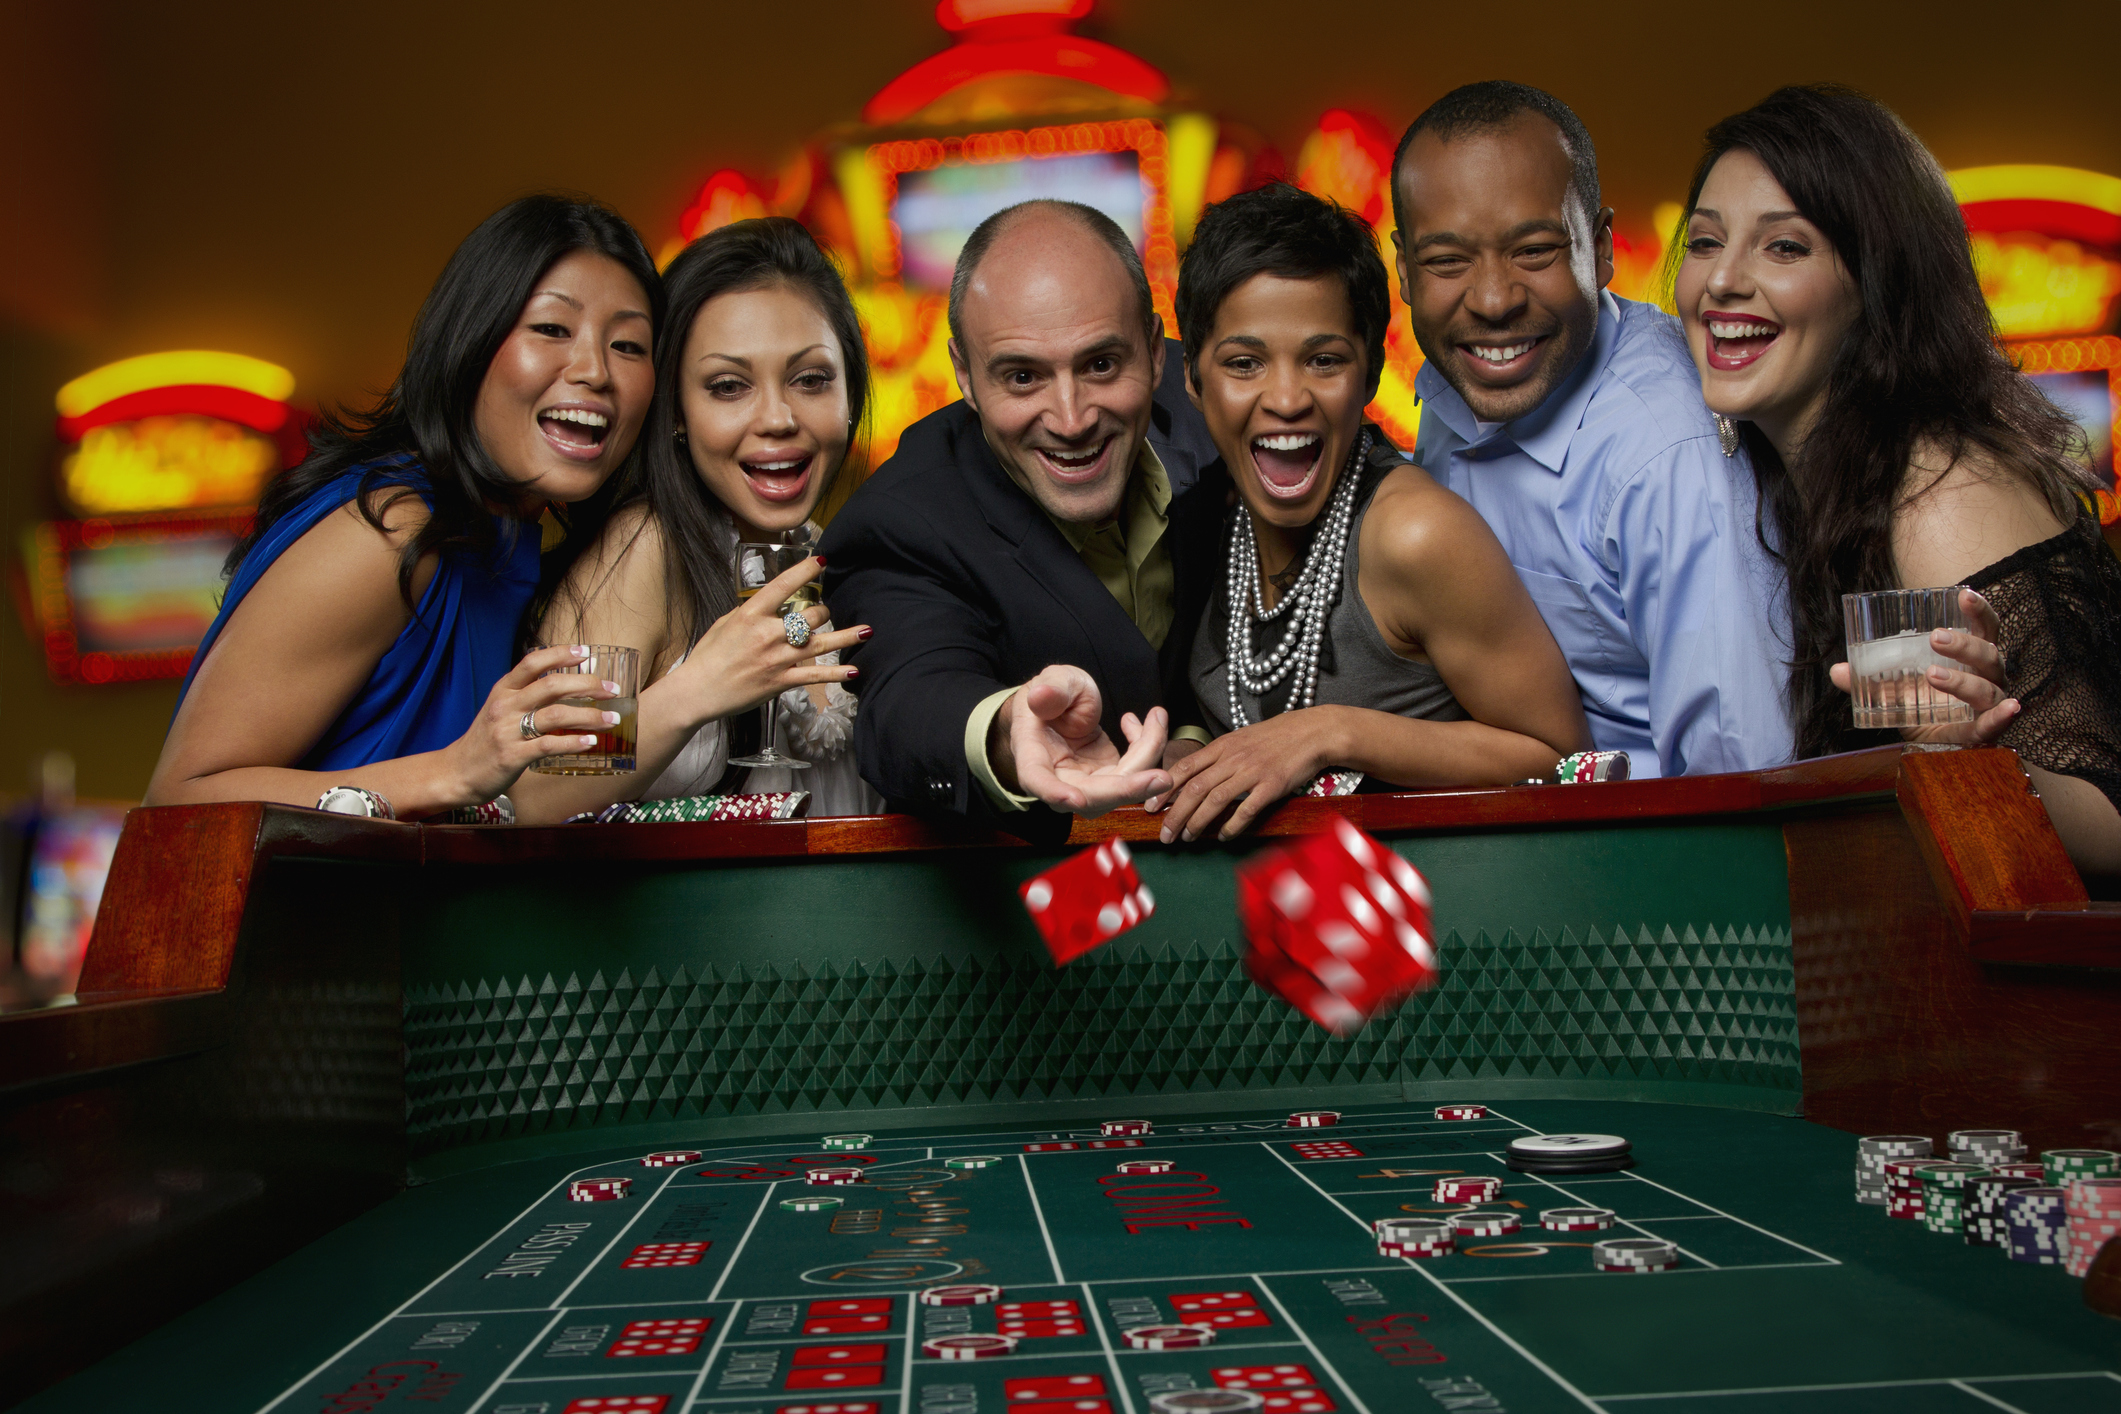 Why do people gamble online?